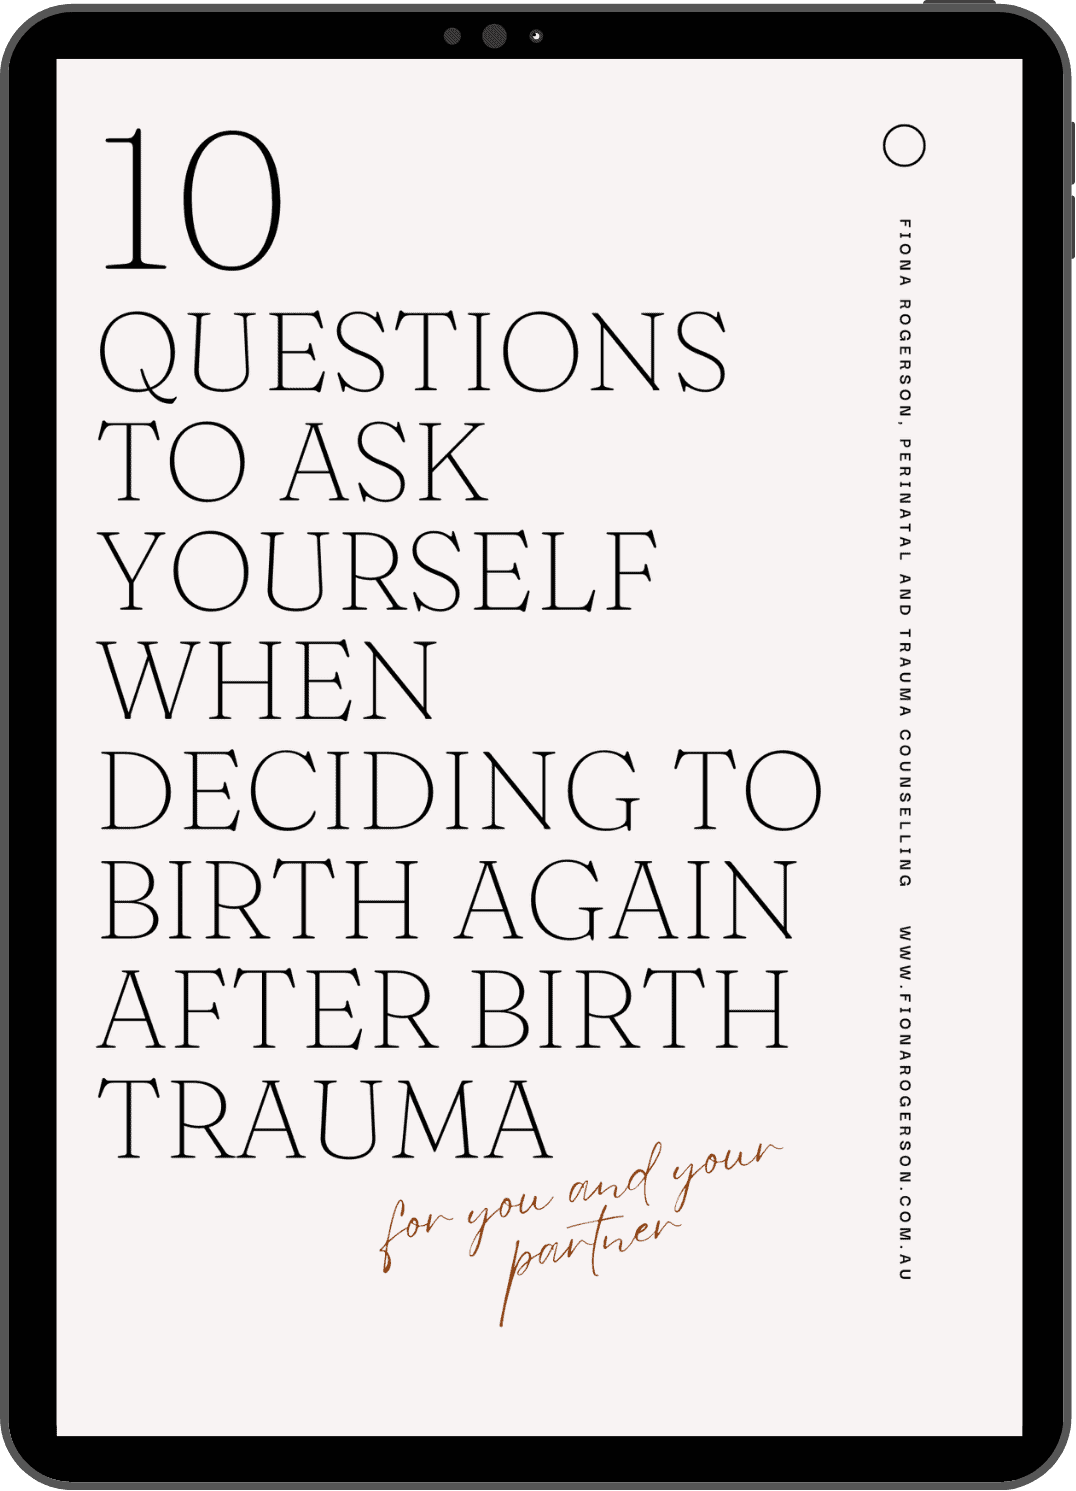 Free download - 10 questions to ask yourself when deciding to birth again after birth trauma Fiona rogerson